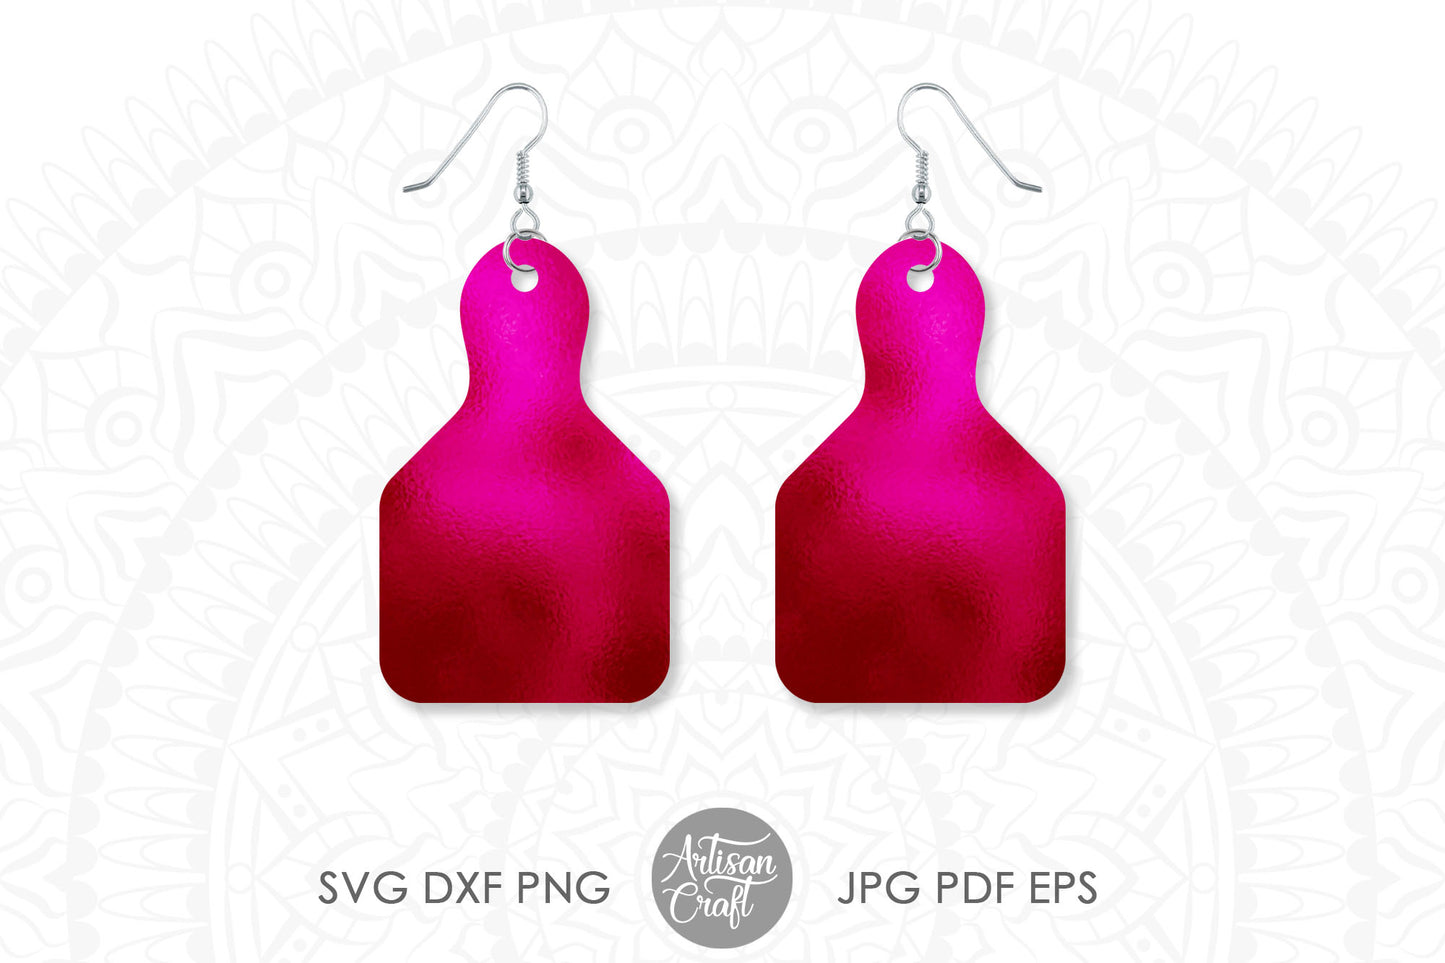 Cow tag earrings SVG